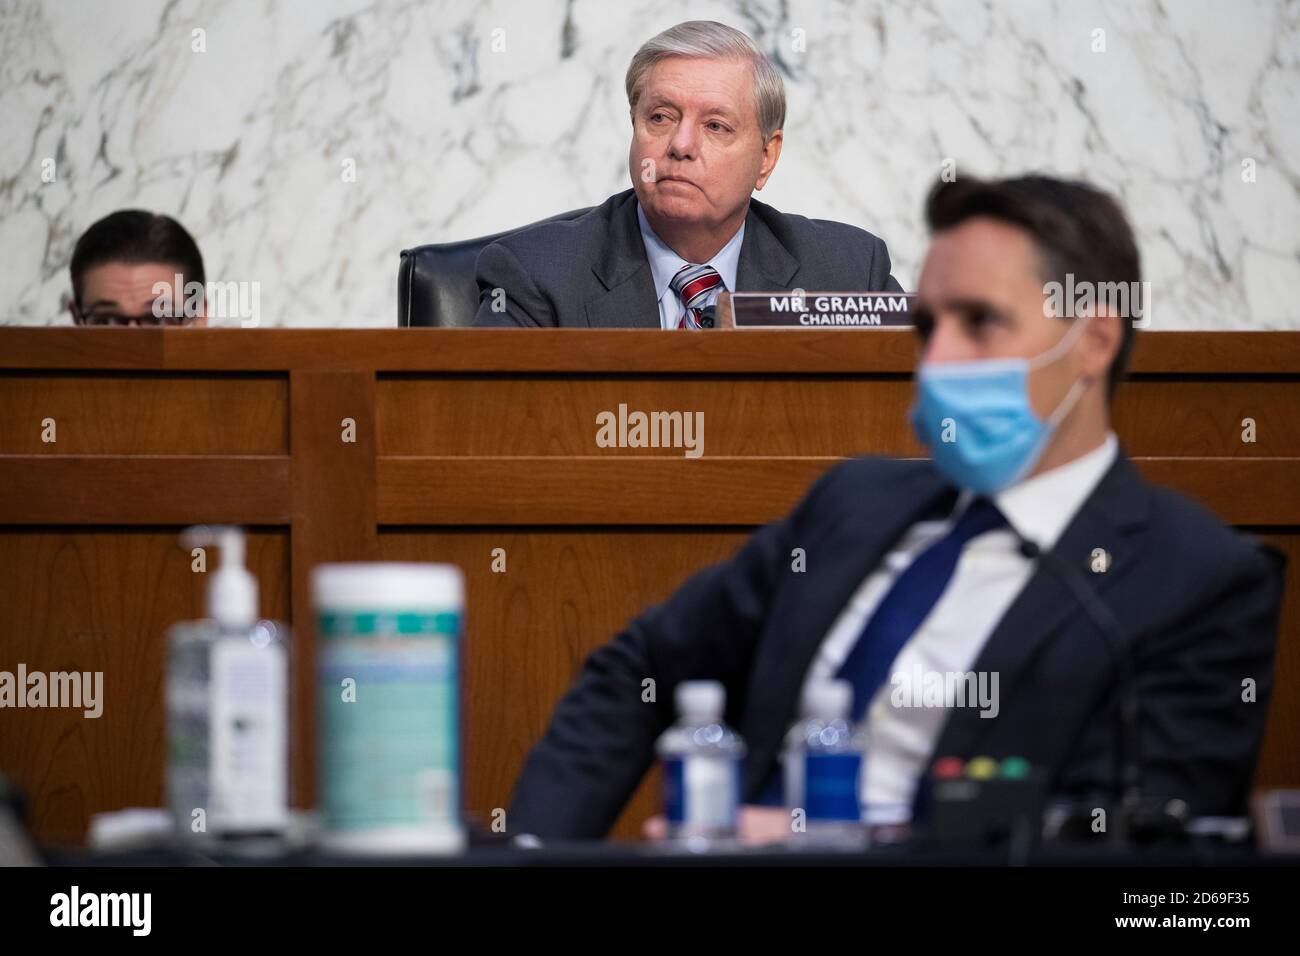 Senate Judiciary Committee Chairman Lyndsey Graham looks on during the confirmation hearing for Supreme Court nominee Judge Amy Coney Barrett before the Senate Judiciary Committee on Capitol Hill in Washington, DC, USA, 15 October 2020. Barrett was nominated by President Donald Trump to fill the vacancy left by Justice Ruth Bader Ginsburg who passed away in September.Credit: Anna Moneymaker/Pool via CNP /MdeiaPunch Stock Photo